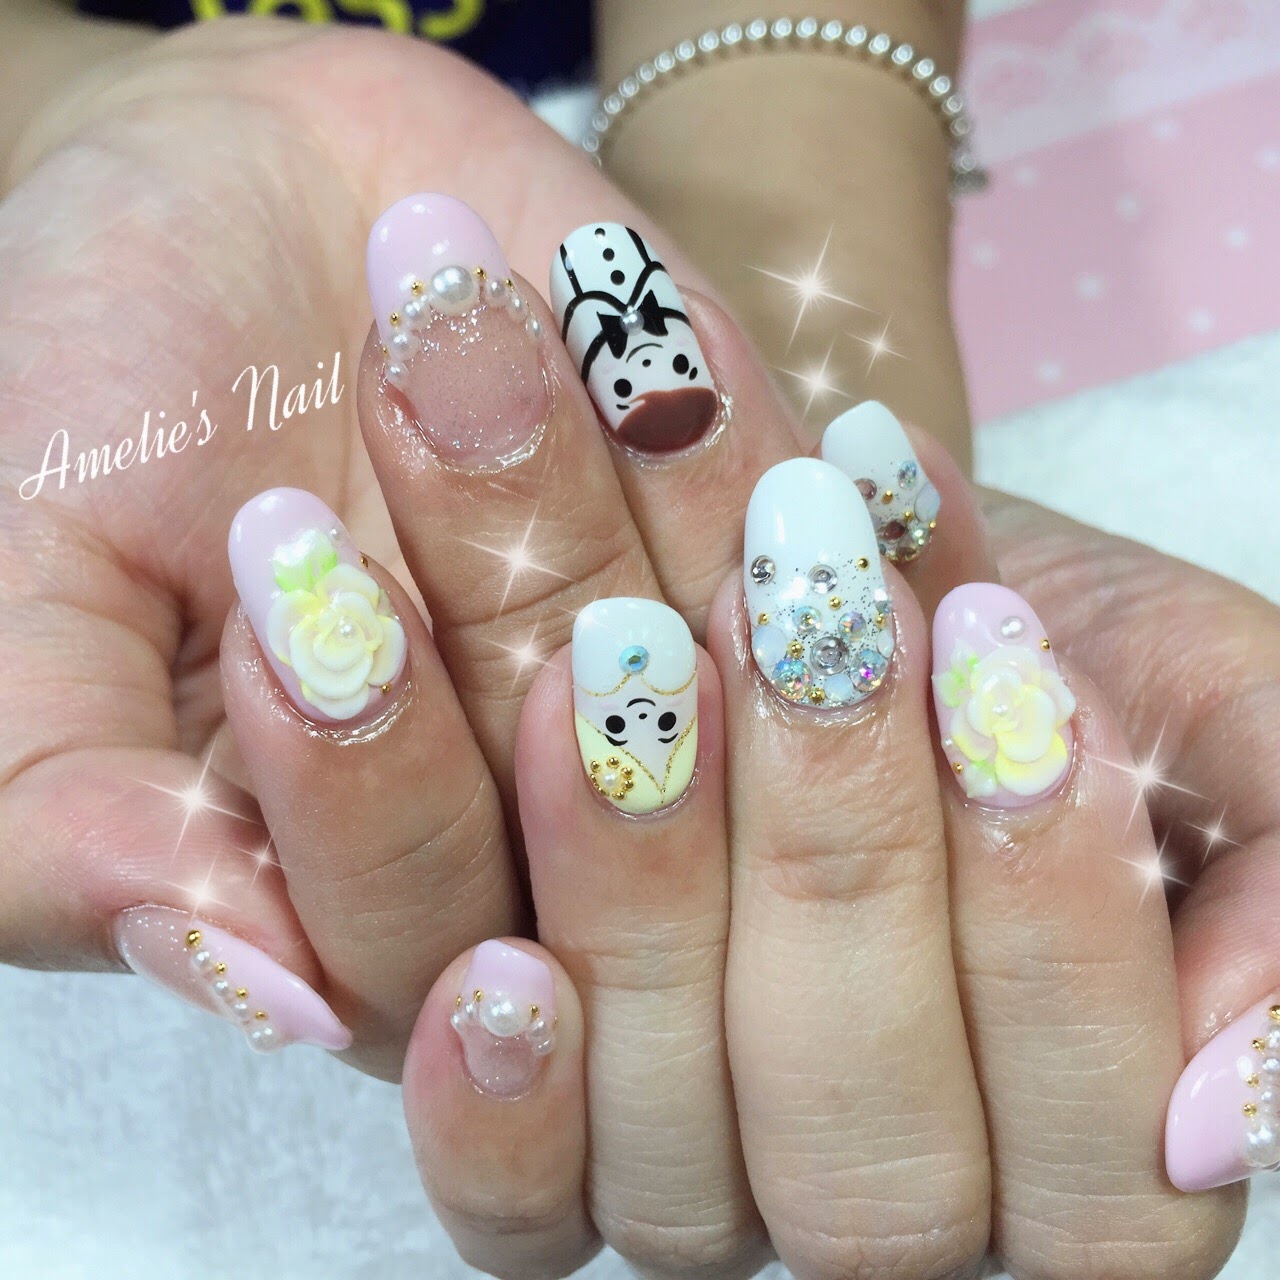 Amelie's Nail Journey